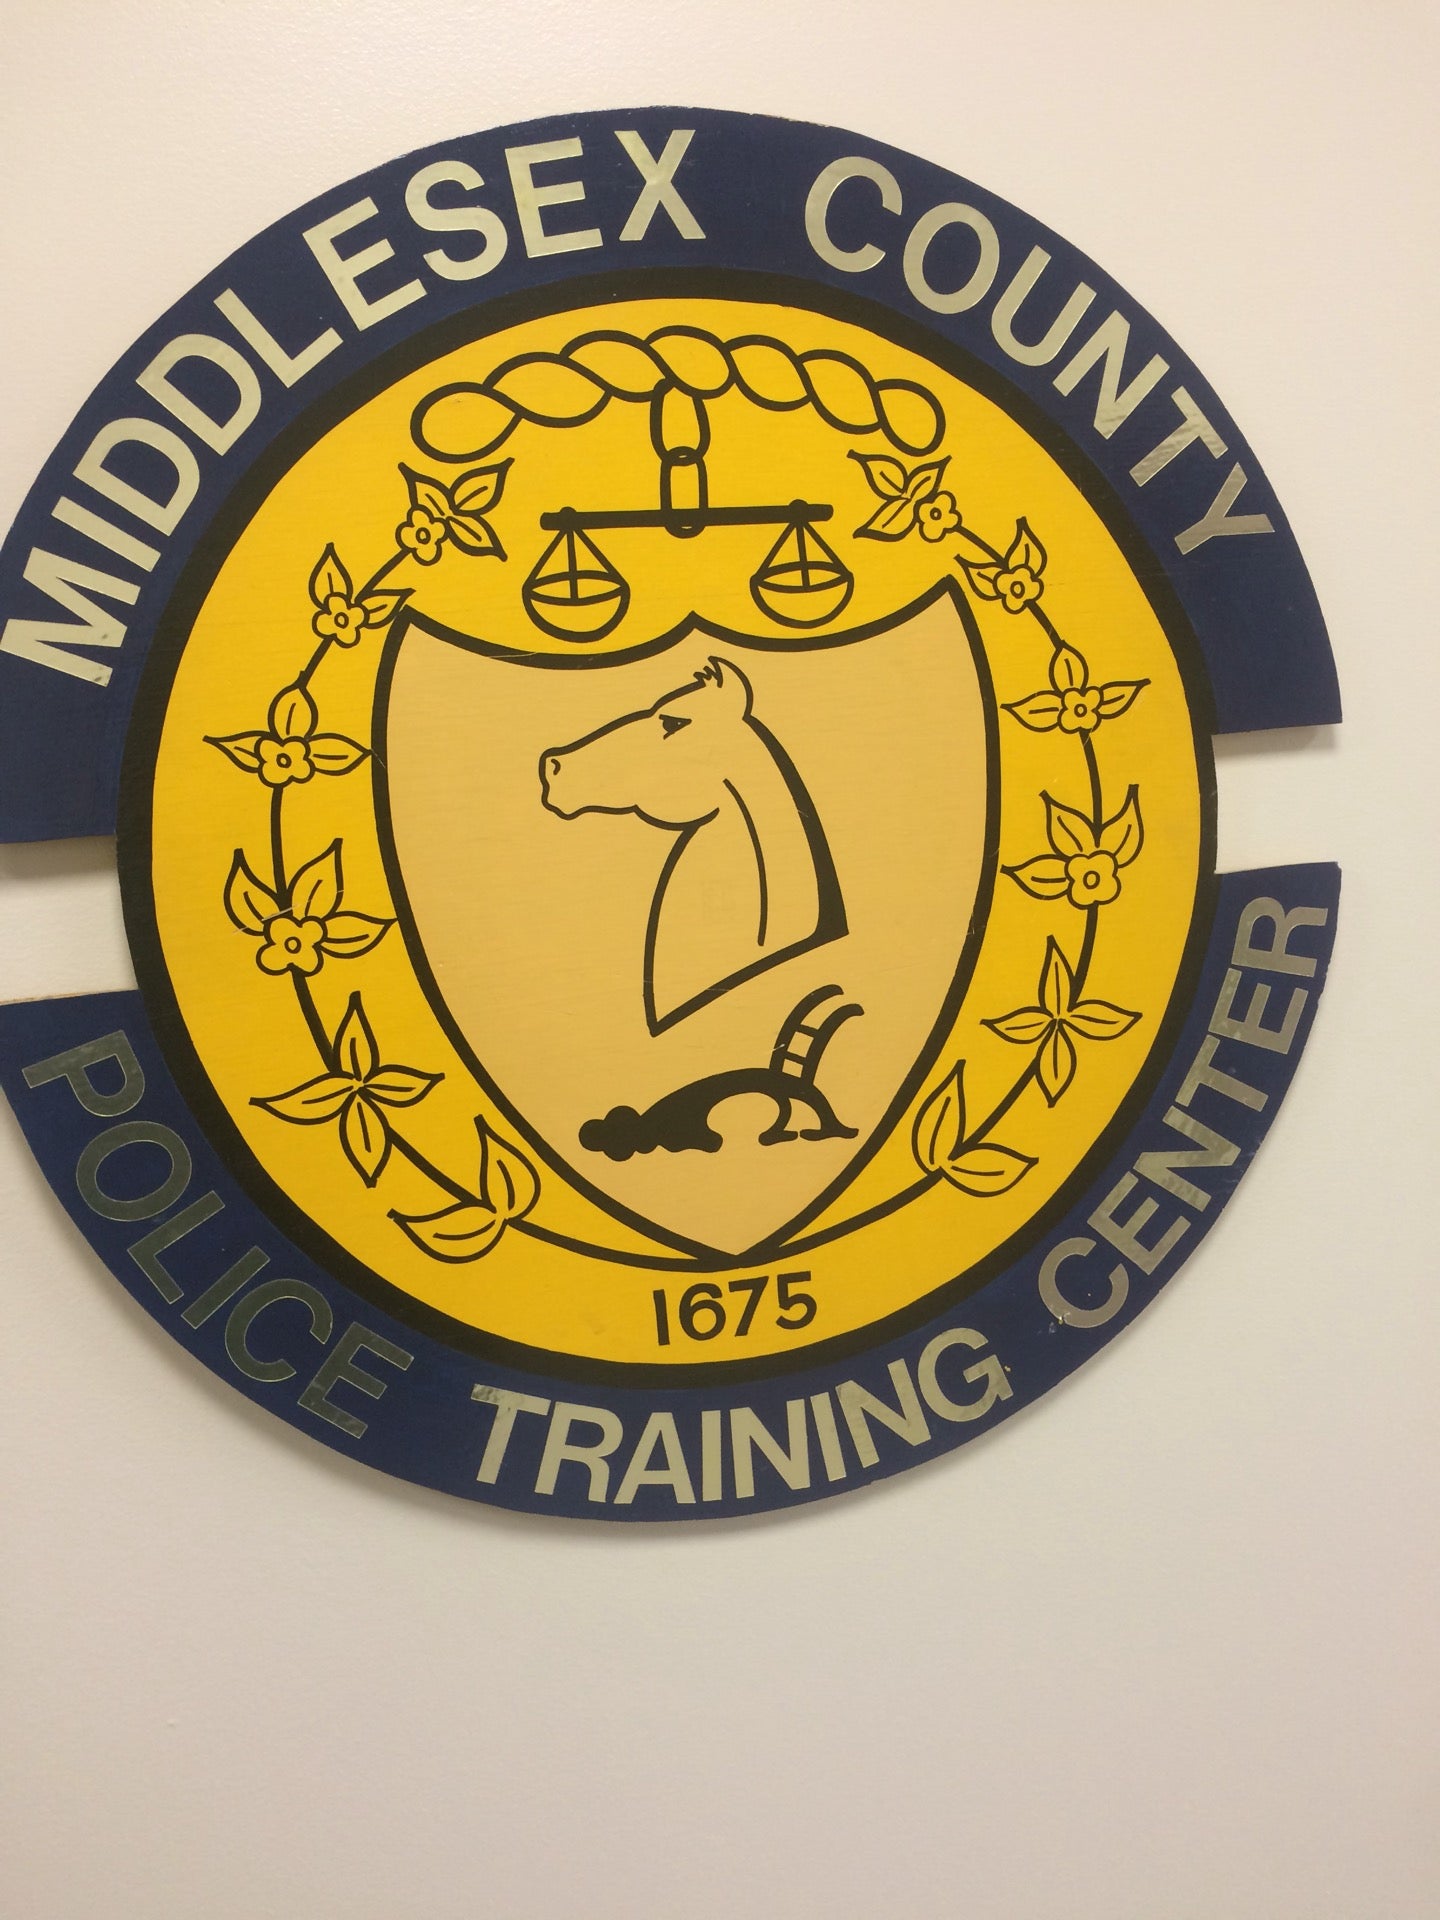 Middlesex County Police Training Center, 11 Patrol Rd, Edison Twp, NJ